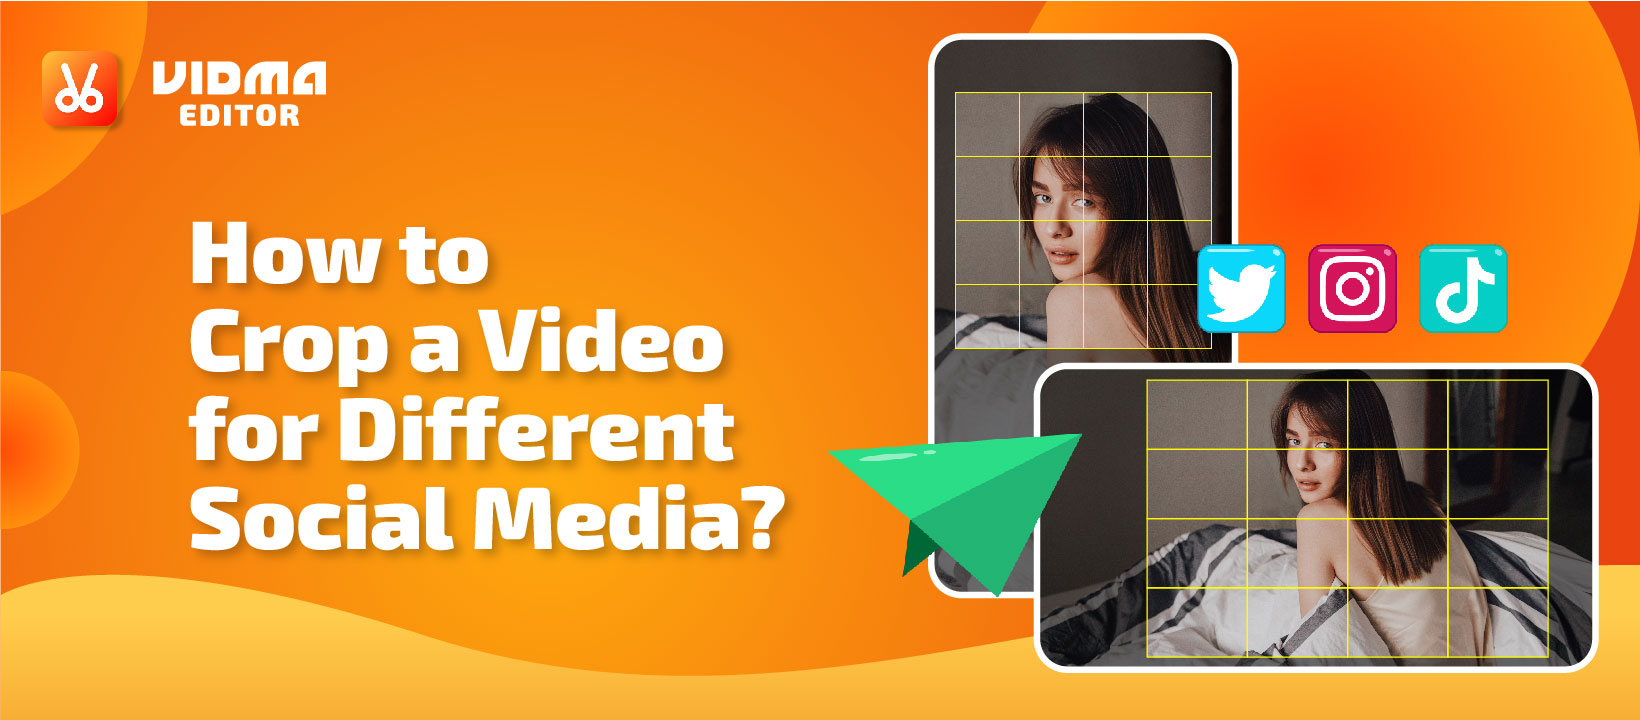 How to Crop a Video For Different Social Media?